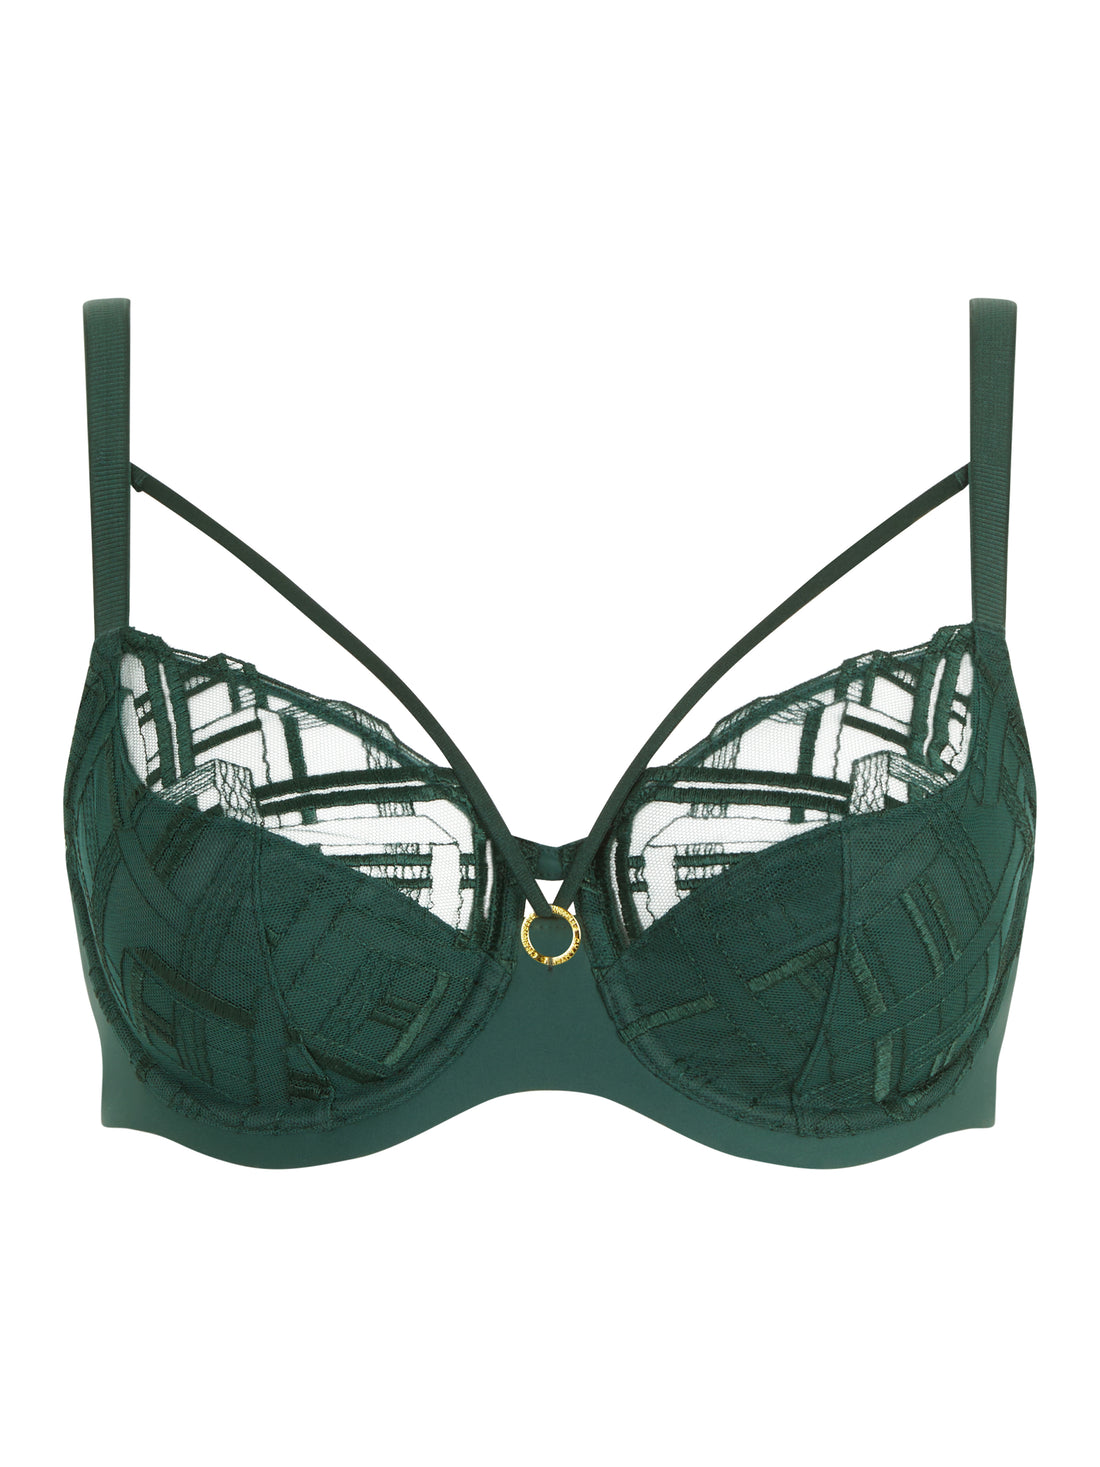 Chantelle - Graphic Support Bra in Green